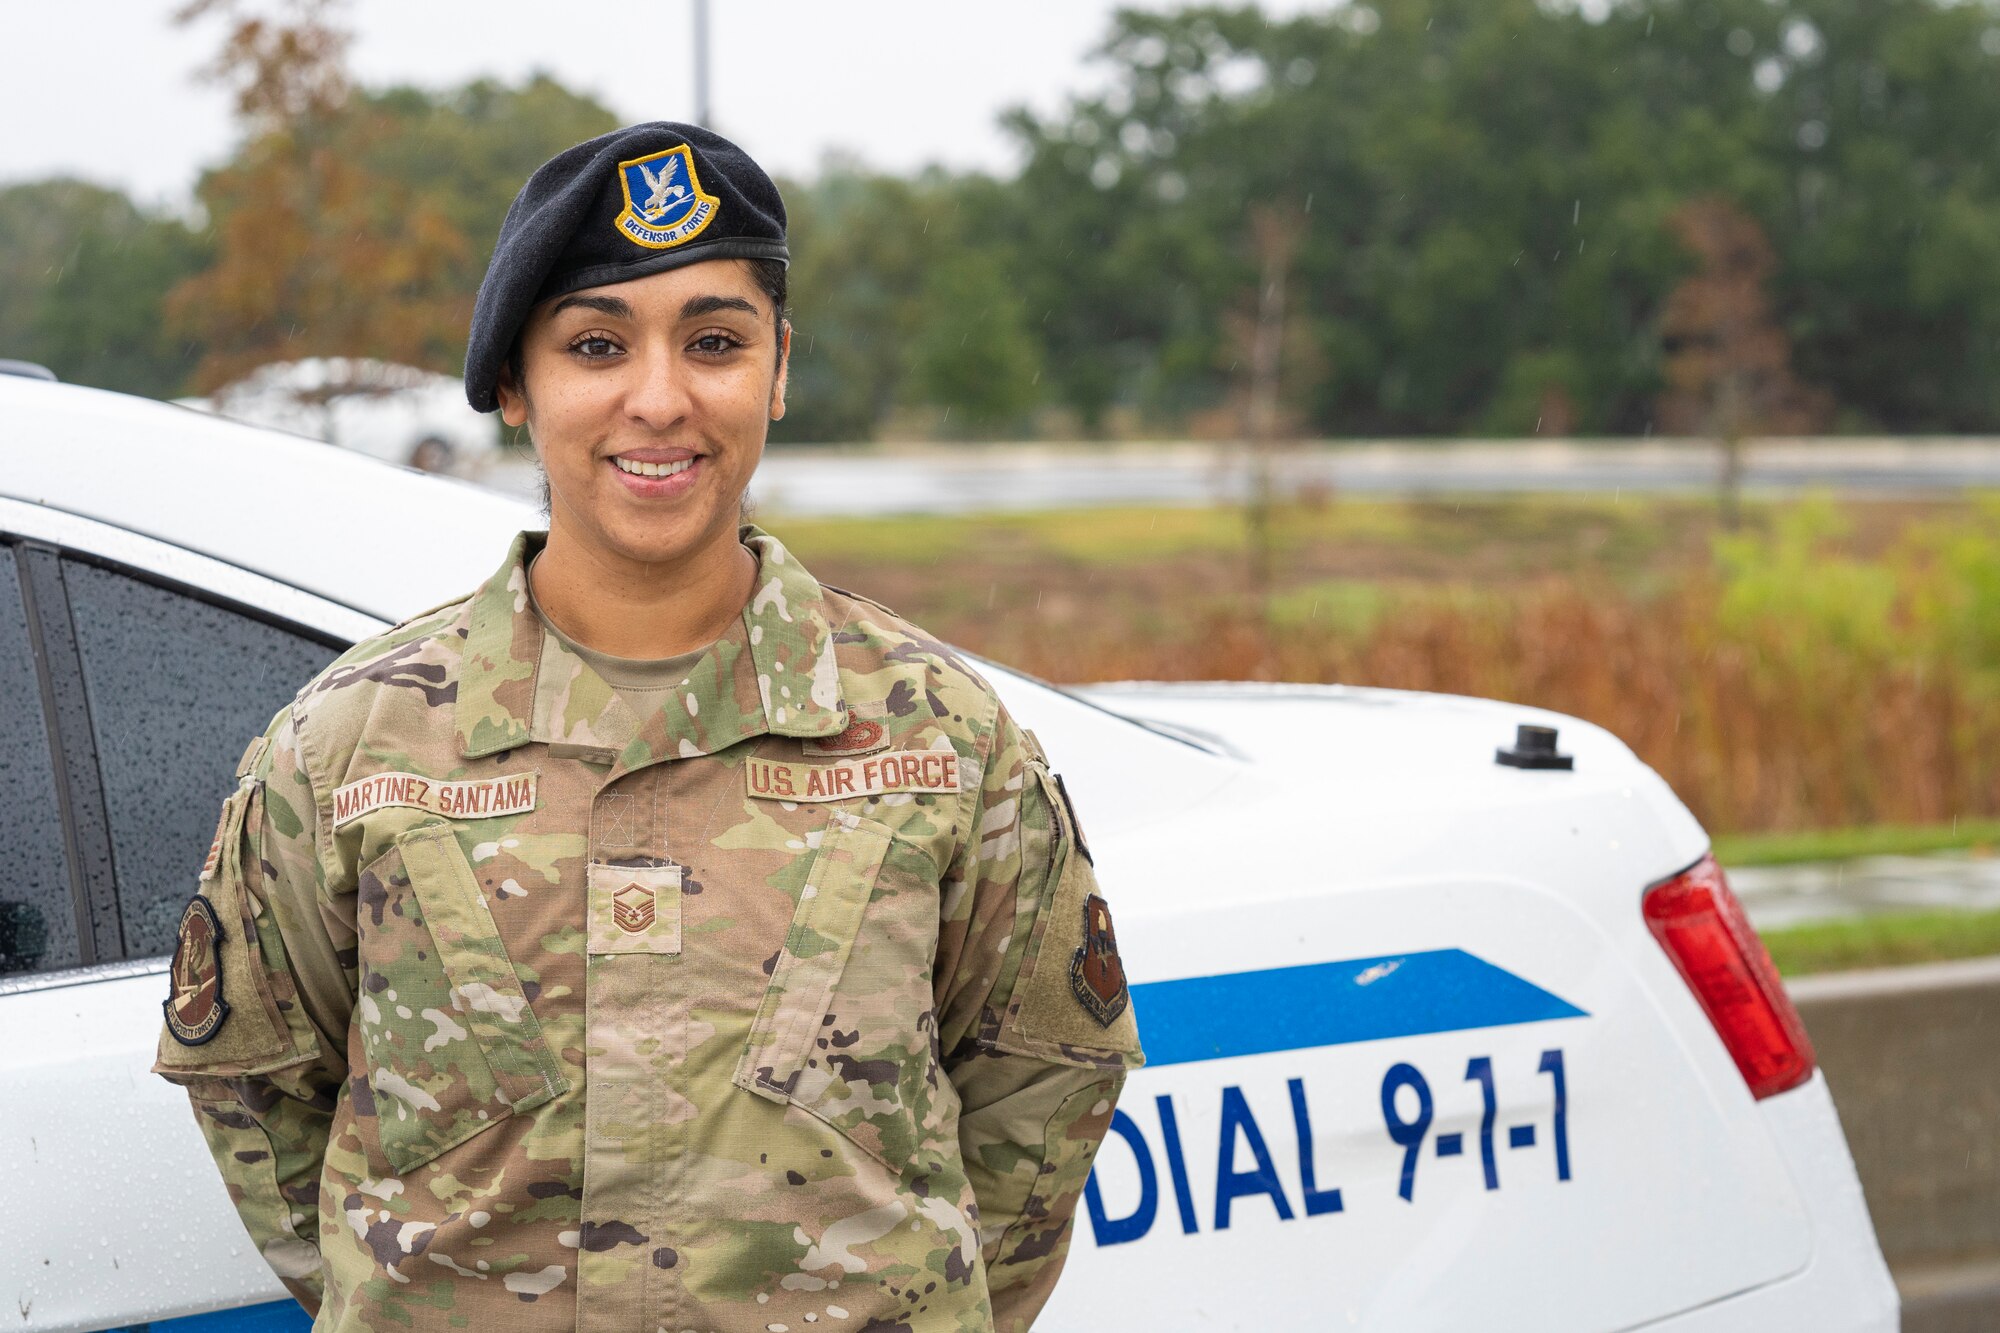 U.S. Air Force Master Sgt. Jessica Martinez-Santana, 81st Security Forces Squadron operations NCO in charge, poses for a photo at Keesler Air Force Base, Mississippi, Nov. 14, 2023.